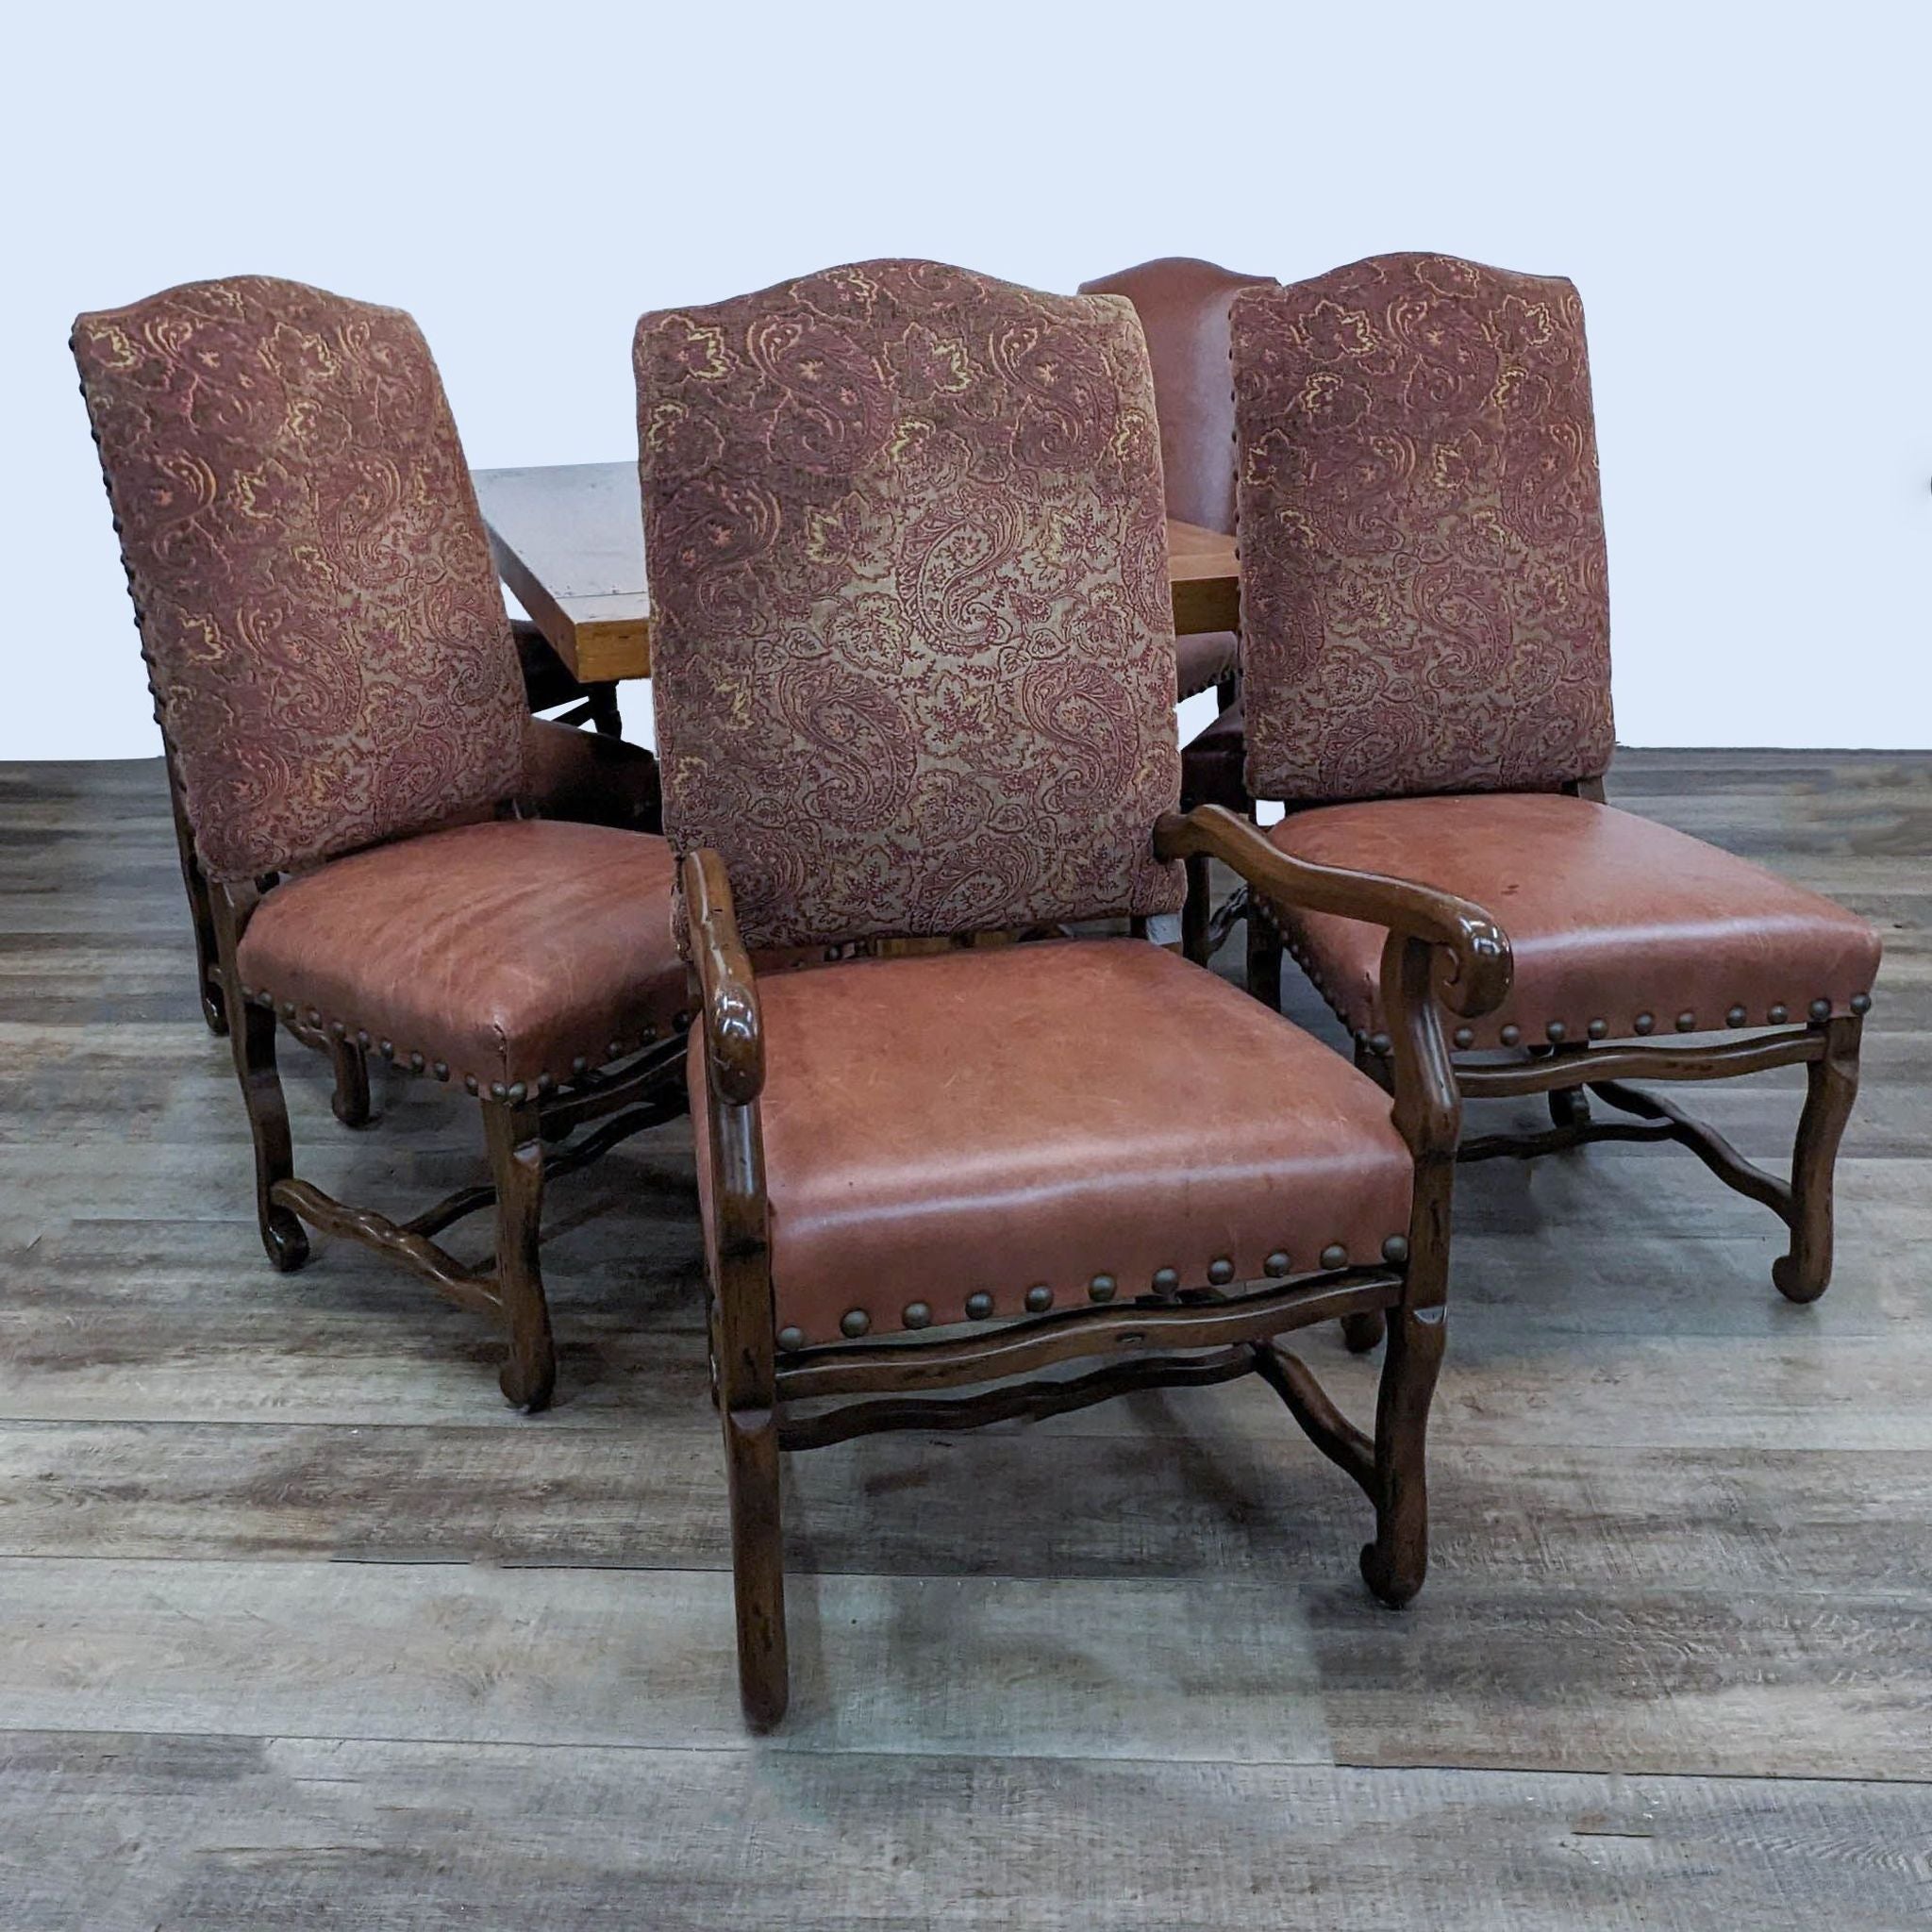 Walter and Wabash dining set with two armchairs, fabric and leather upholstery, decorative stitching.